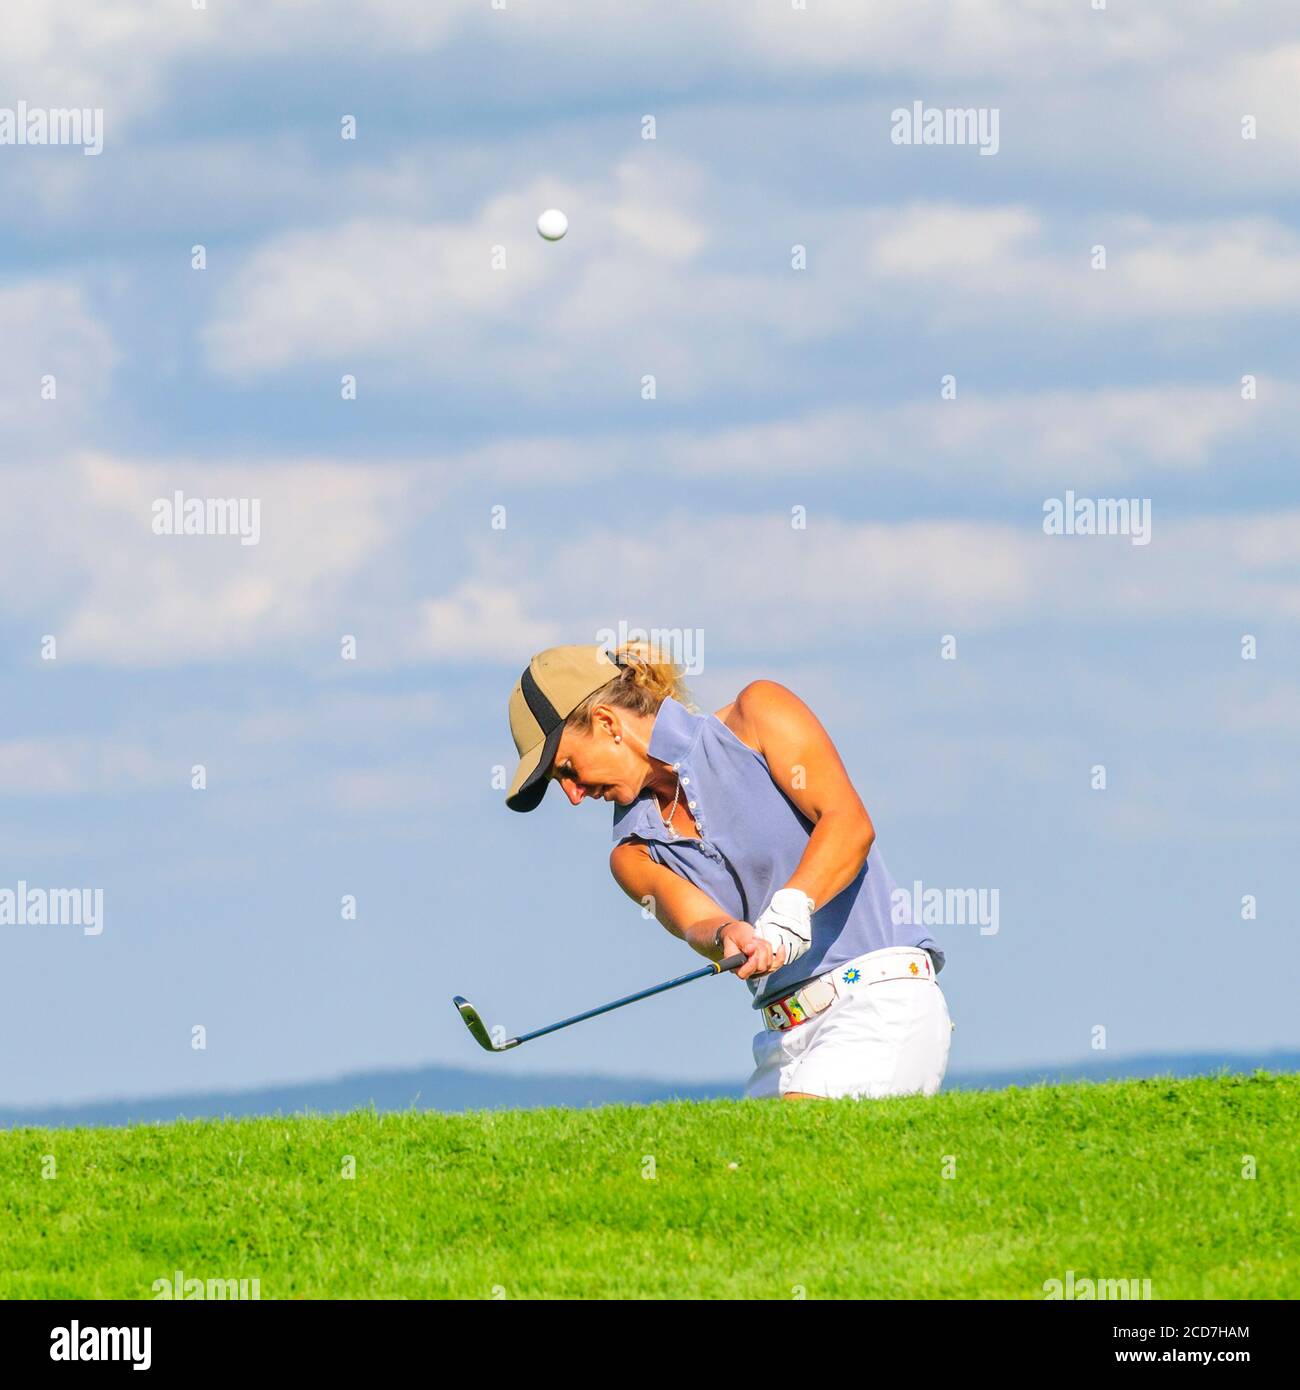 Man and woman playing golf on a beautiful parkland course at a sunny day in summertime Stock Photo